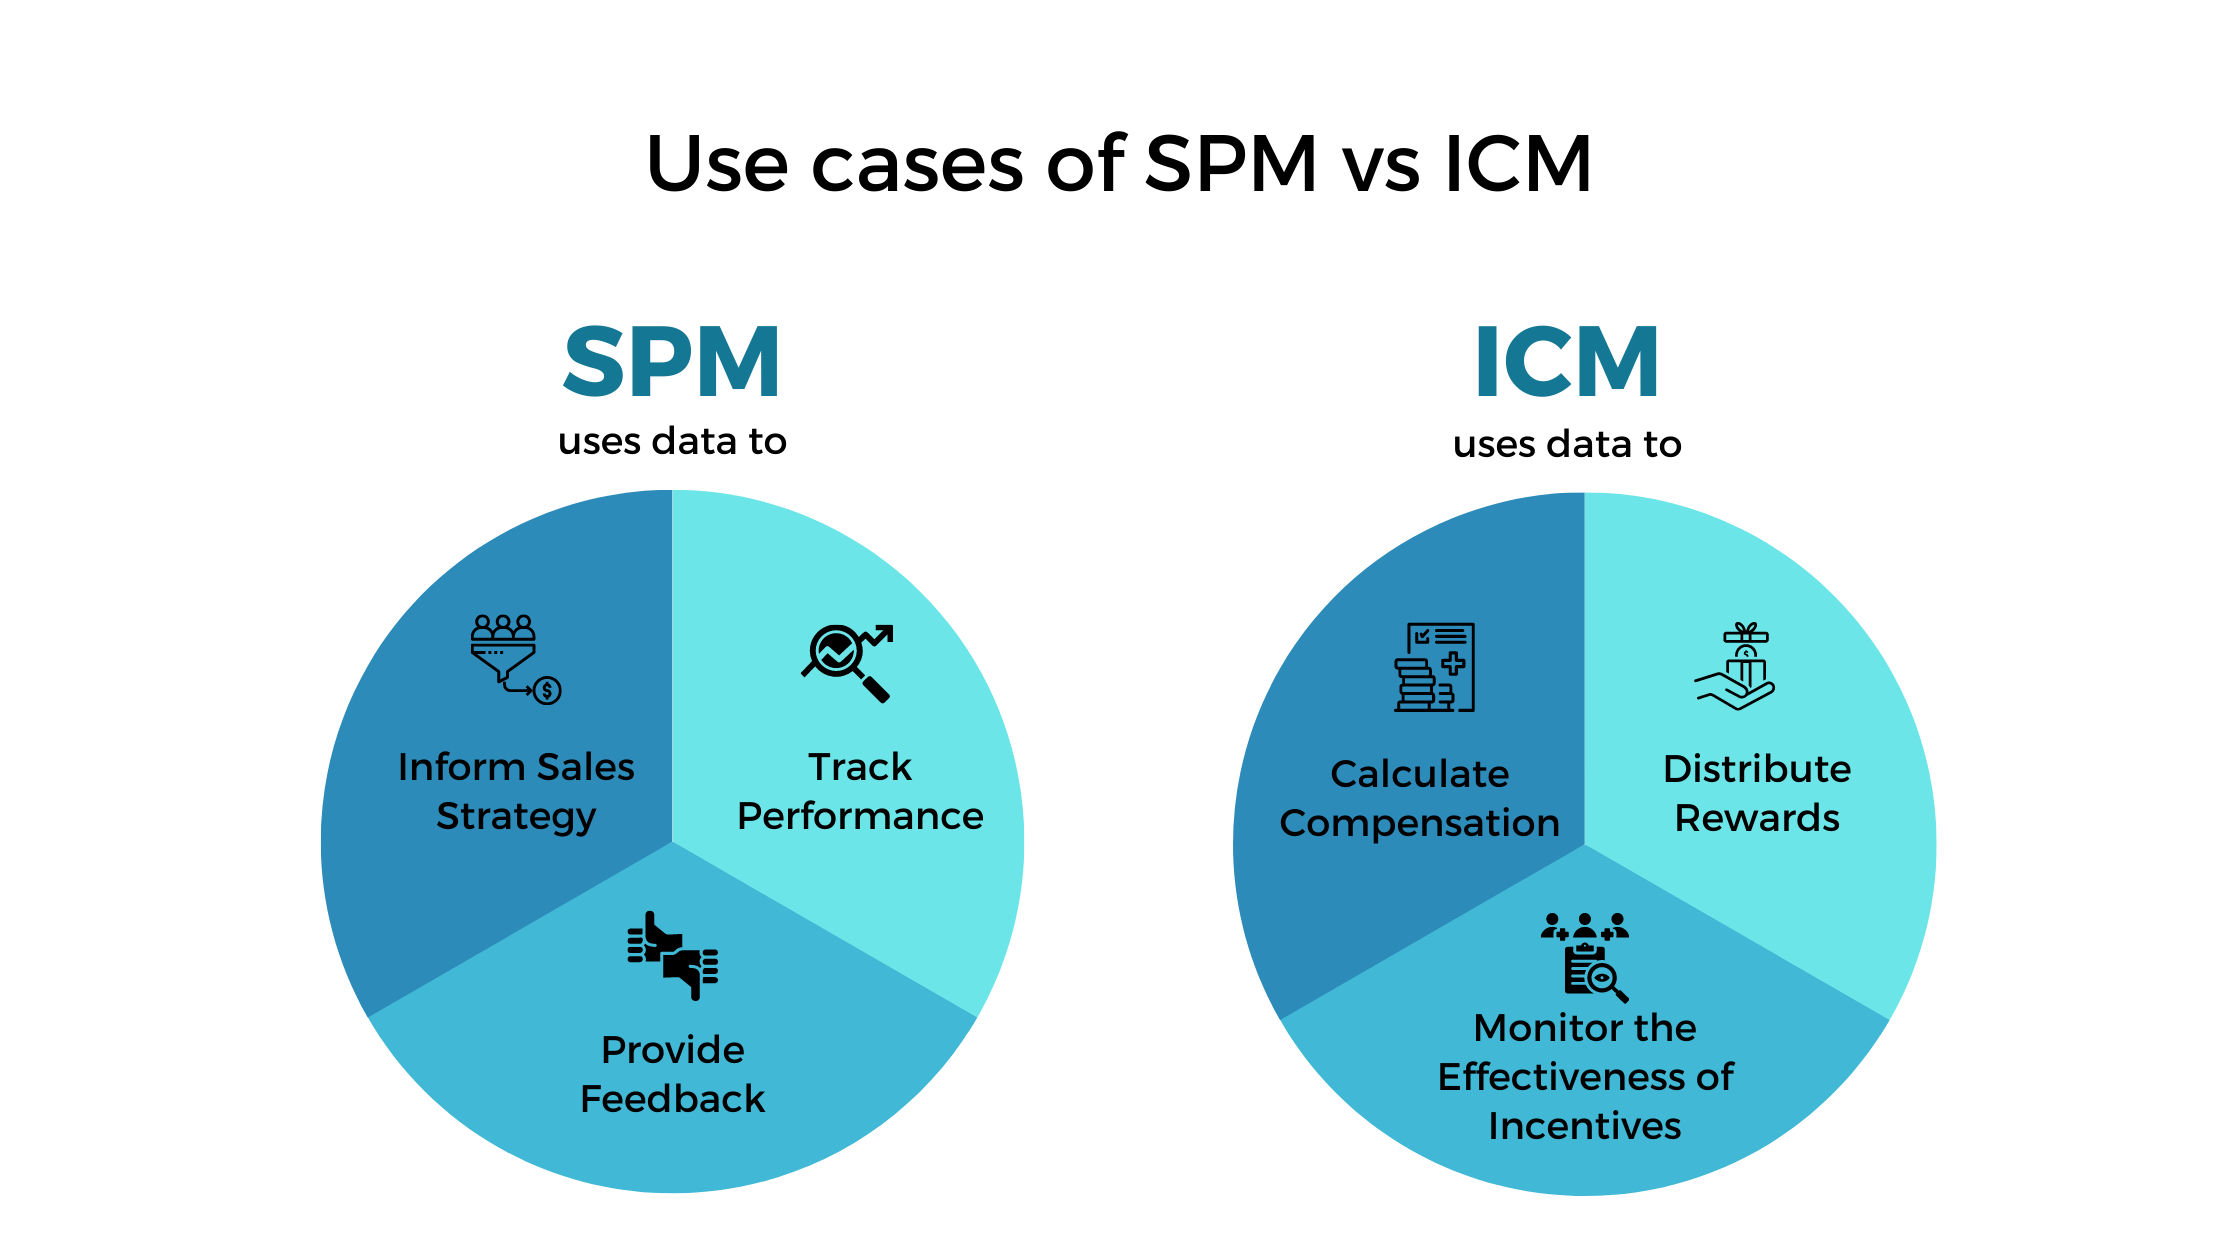 Use cases of sales performance management and incentive compensation management